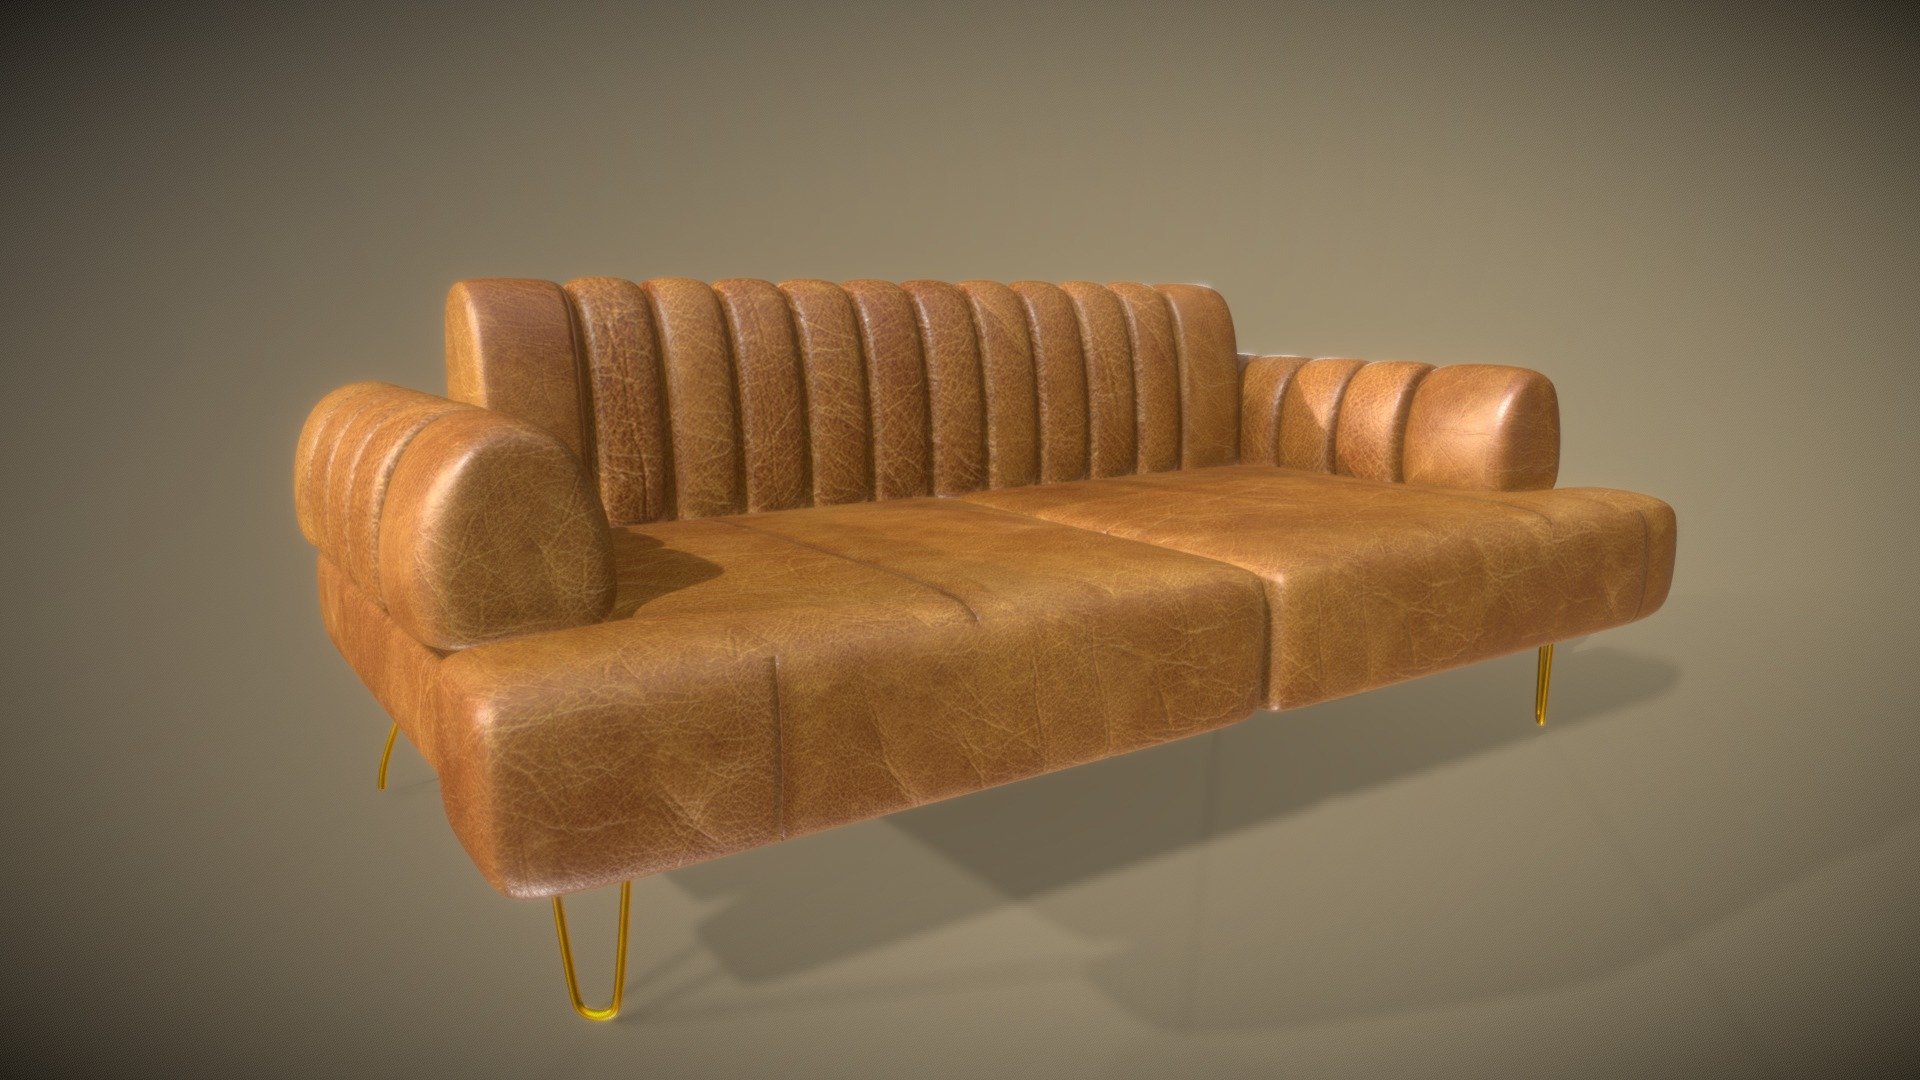 Sofa

*Technical Details- 

Polygons : 134,144   Vertices :  67,132

Texture Map Resolution = 4k DIFFUSE METALNESS ROUGHNESS NORMALS 

*Tip- The Model is intended to get Highest Possible Quality with 4K Textures. You might want to compress the Texture considering the requirements of your Projects.

*for any quiries misamalirizvi1994@gmail.com

*if you desire, I can modify the Model based on the criteria of your Ideas, please feel free to contact me.

Appreciate your Download, have a Great Day 3d model